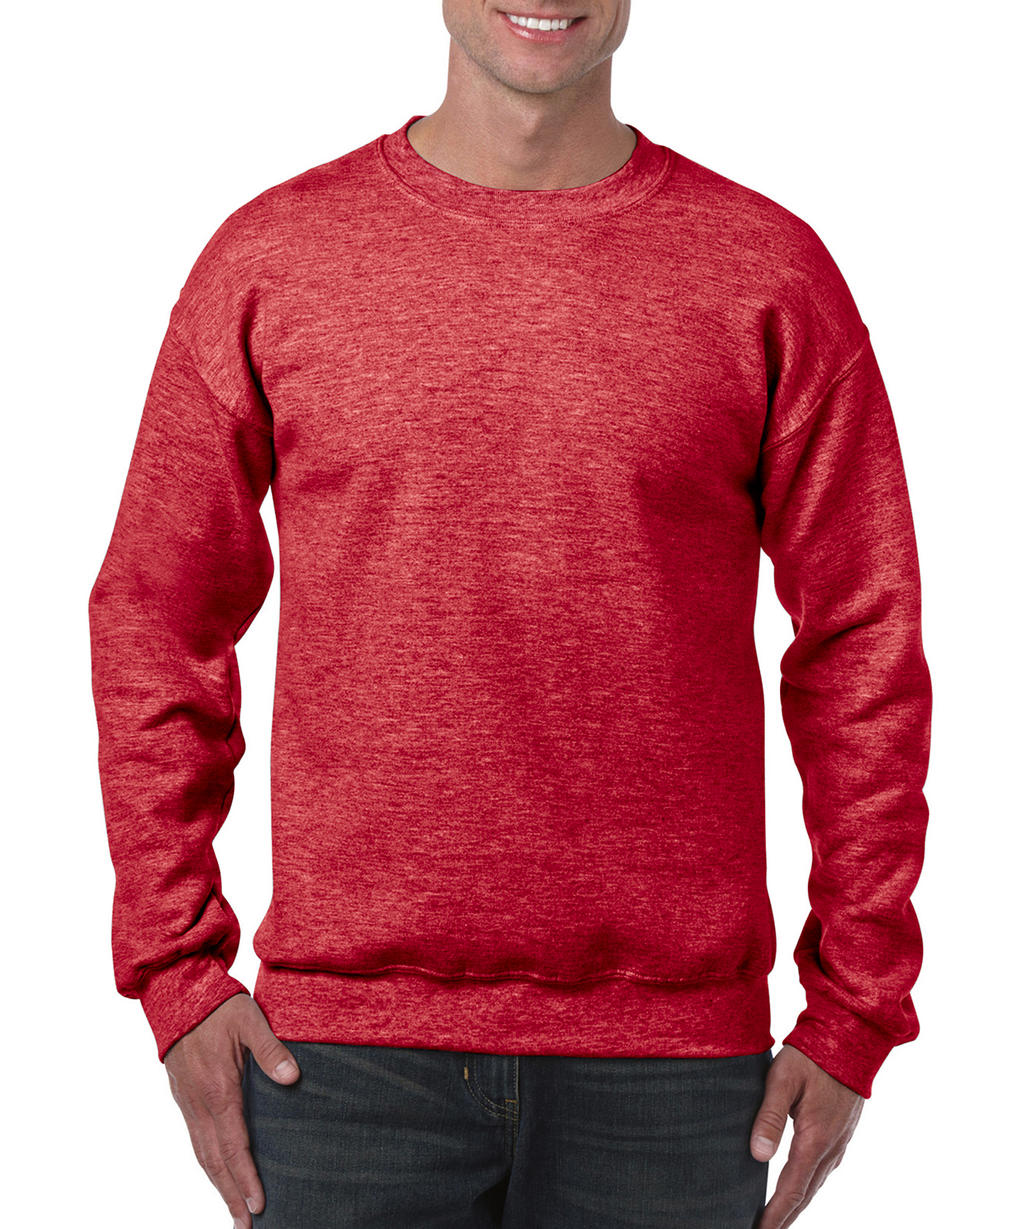  Heavy Blend Adult Crewneck Sweat in Farbe Heather Sport Scarlet Red